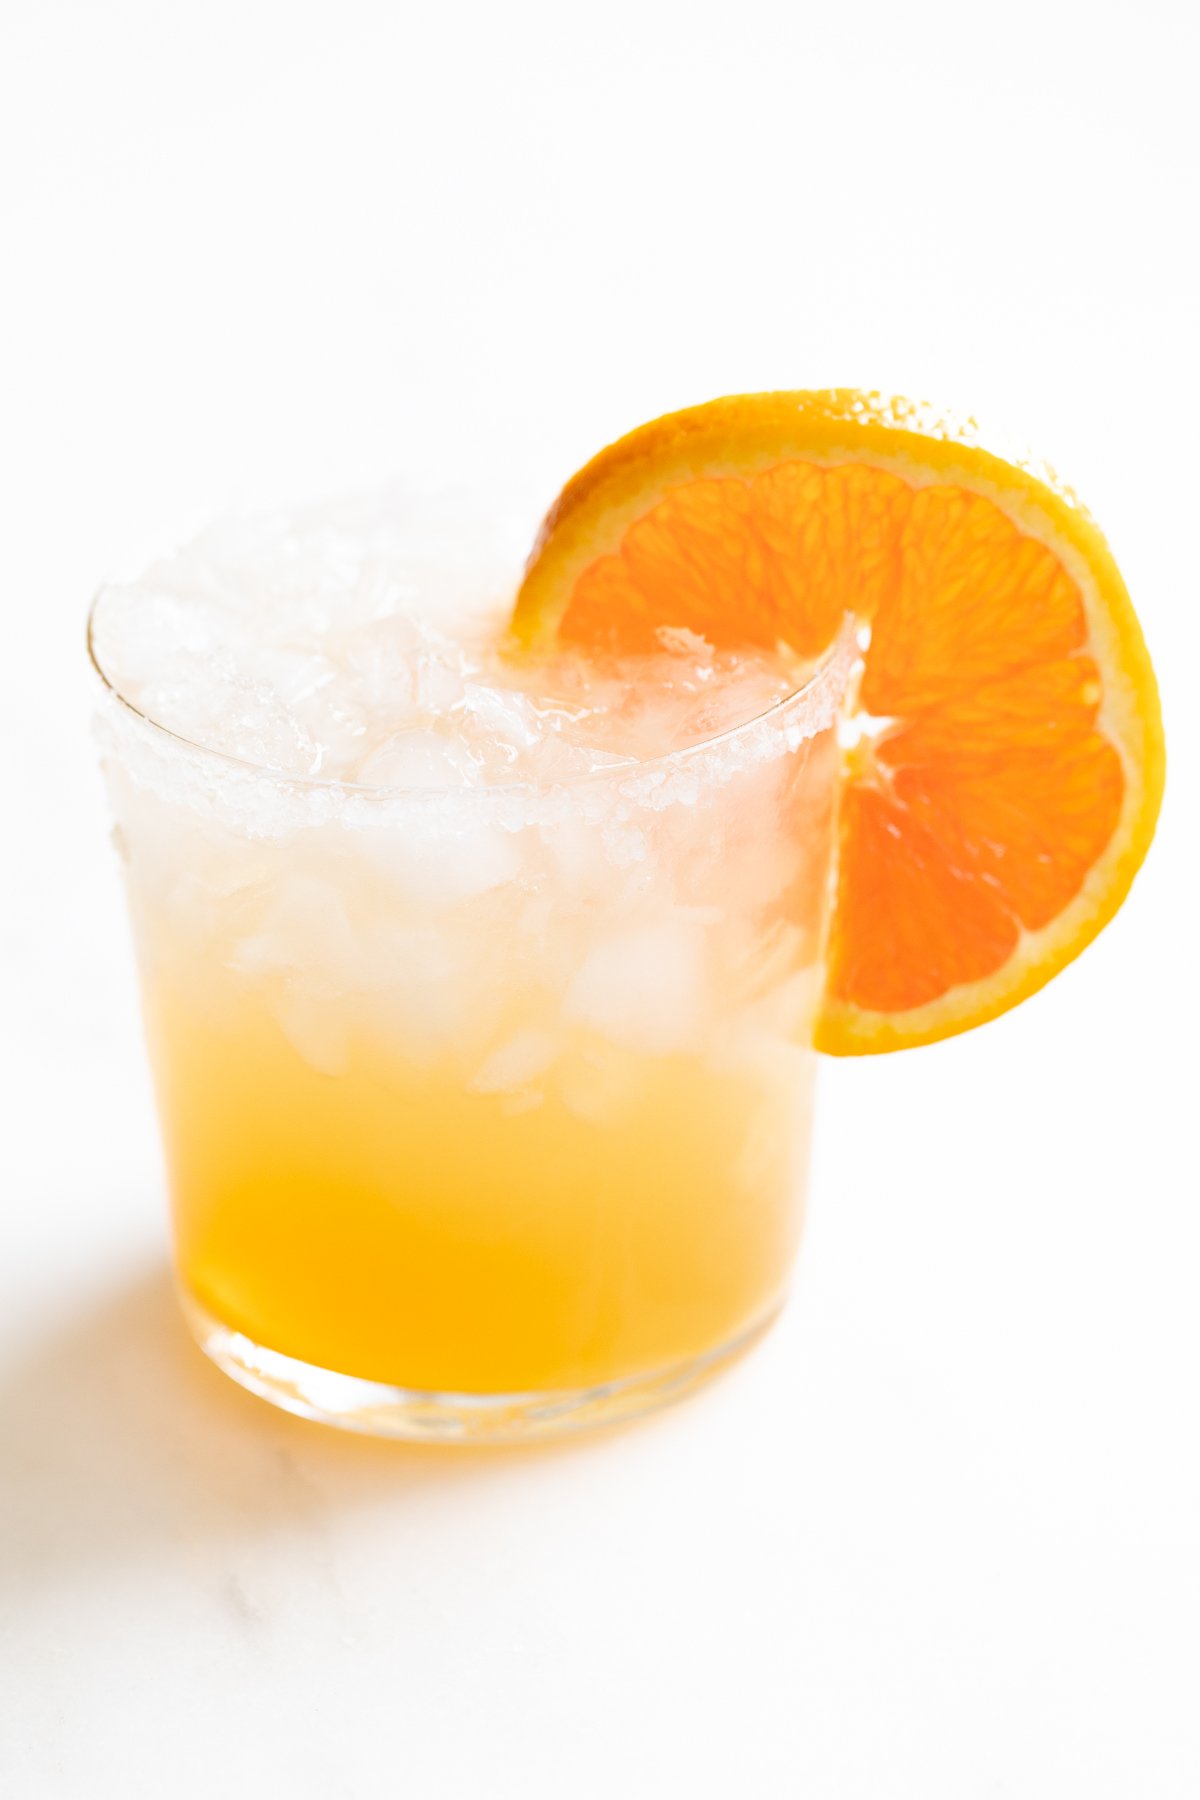 A refreshing Cadillac margarita with crushed ice, garnished with an orange slice.